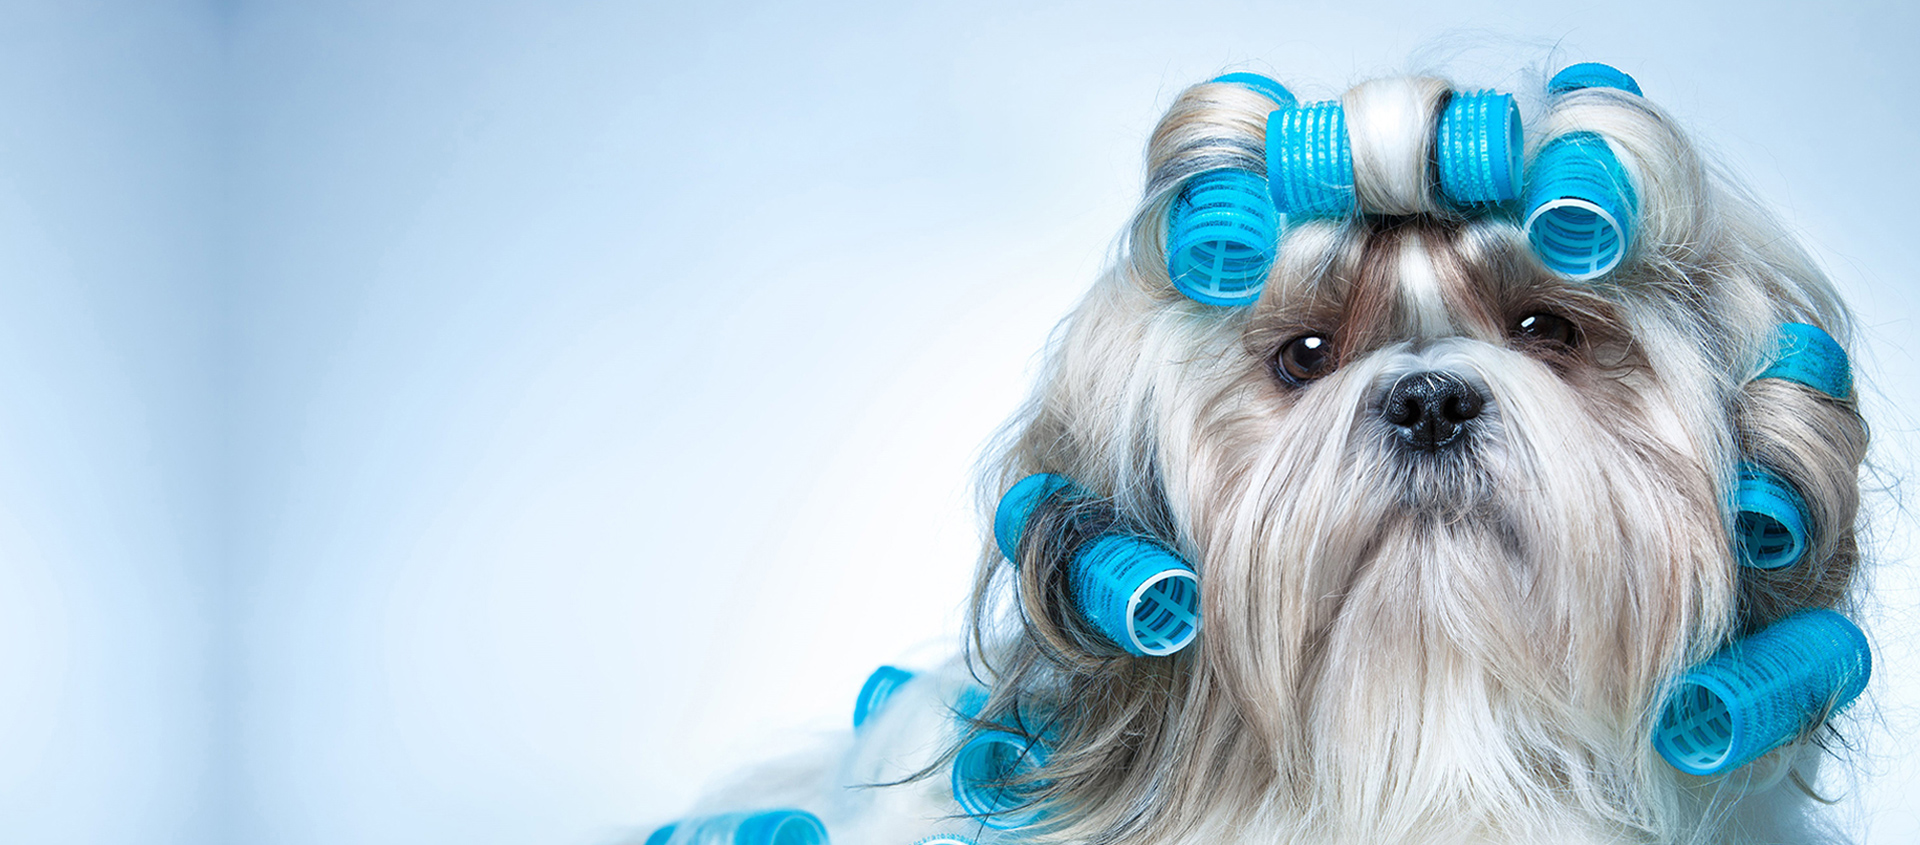 Cloud Canine Salon - Dog Grooming in 